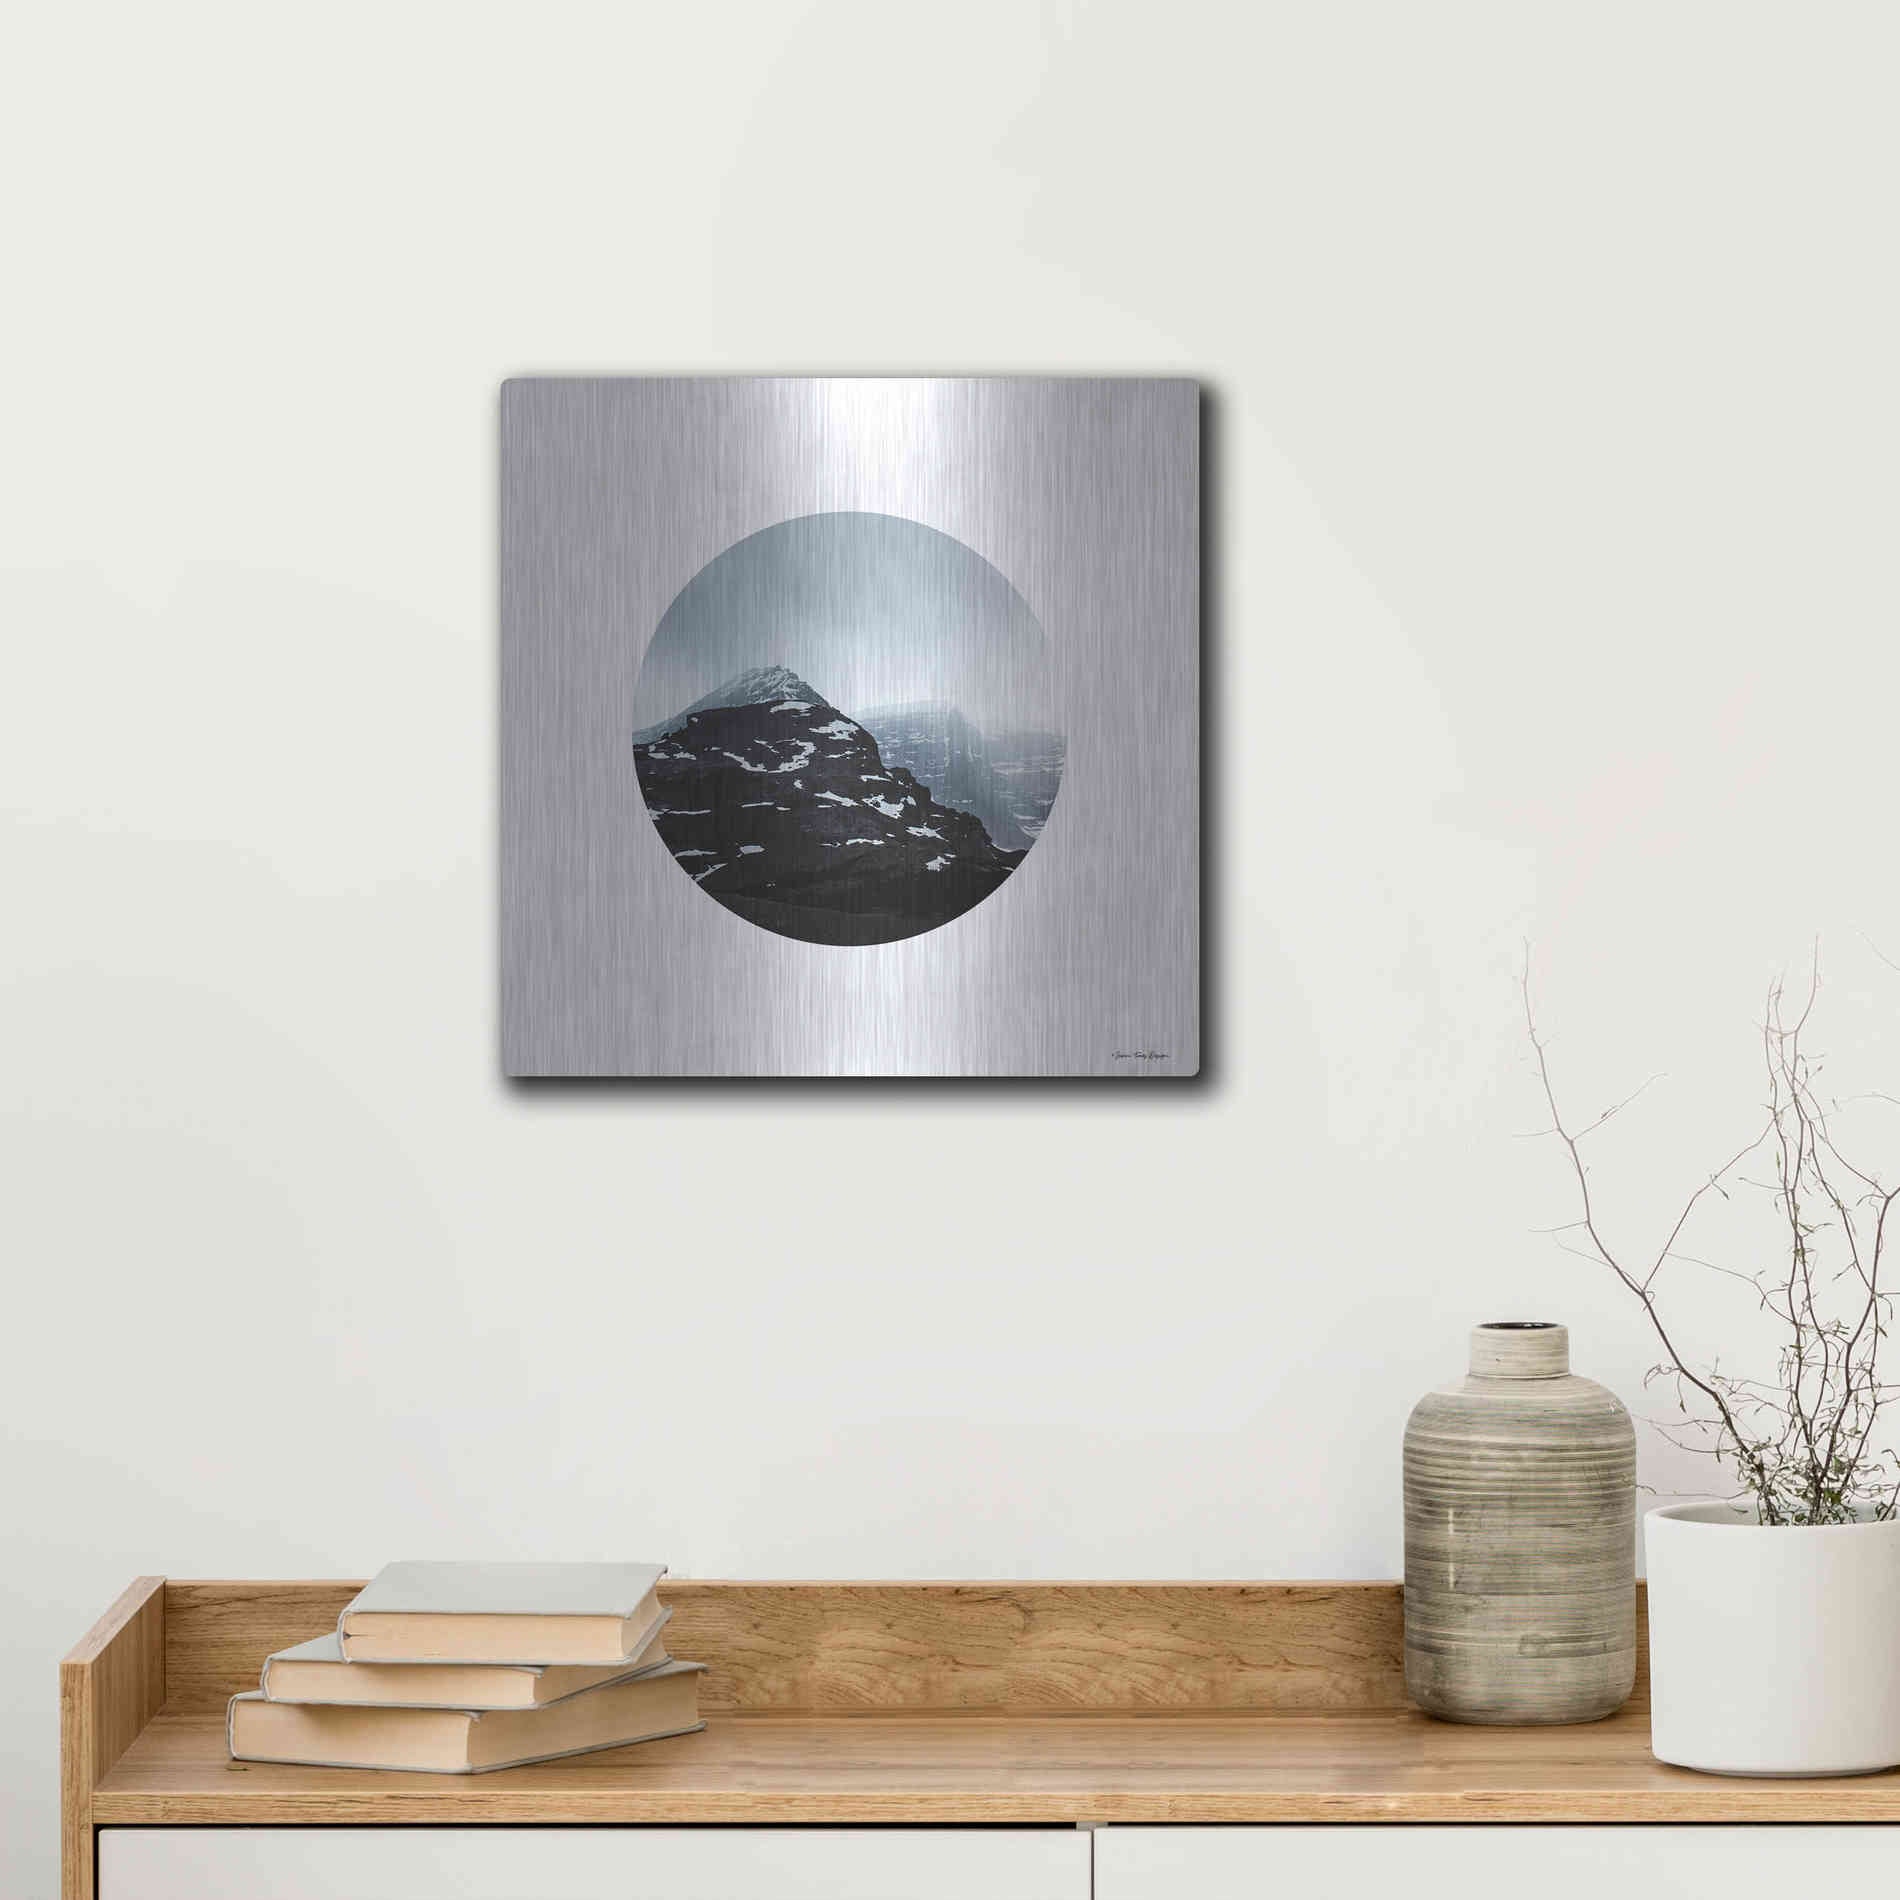 Luxe Metal Art 'Snow Mountains' by Seven Trees Design, Metal Wall Art,12x12